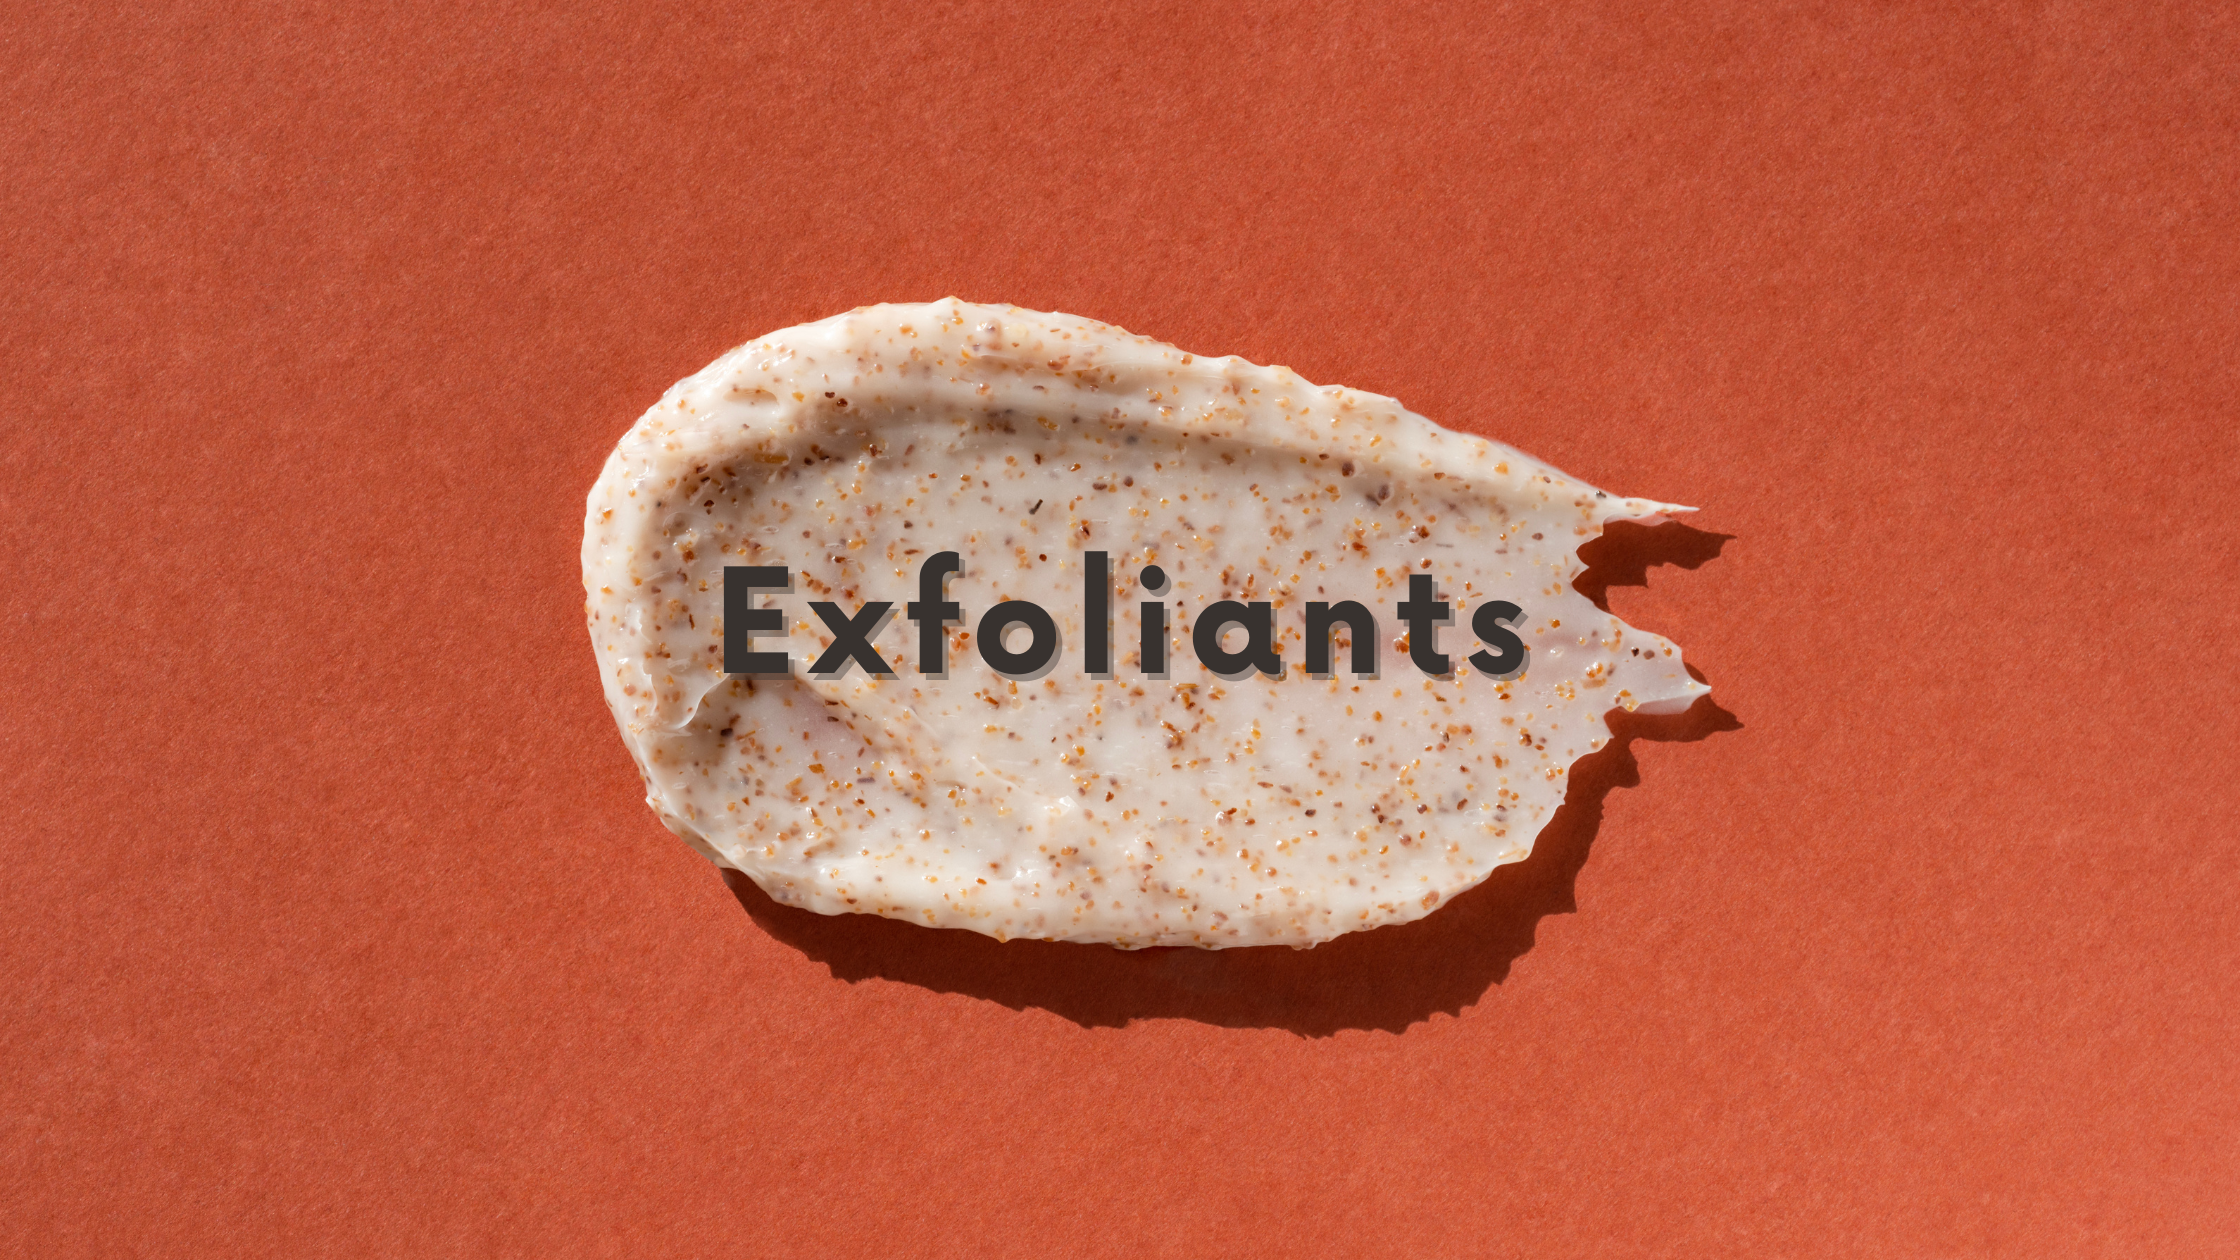 DSC Exfoliants Blog Graphic with black text "Exfoliants" centered over terracotta background with smear of gritty exfoliant